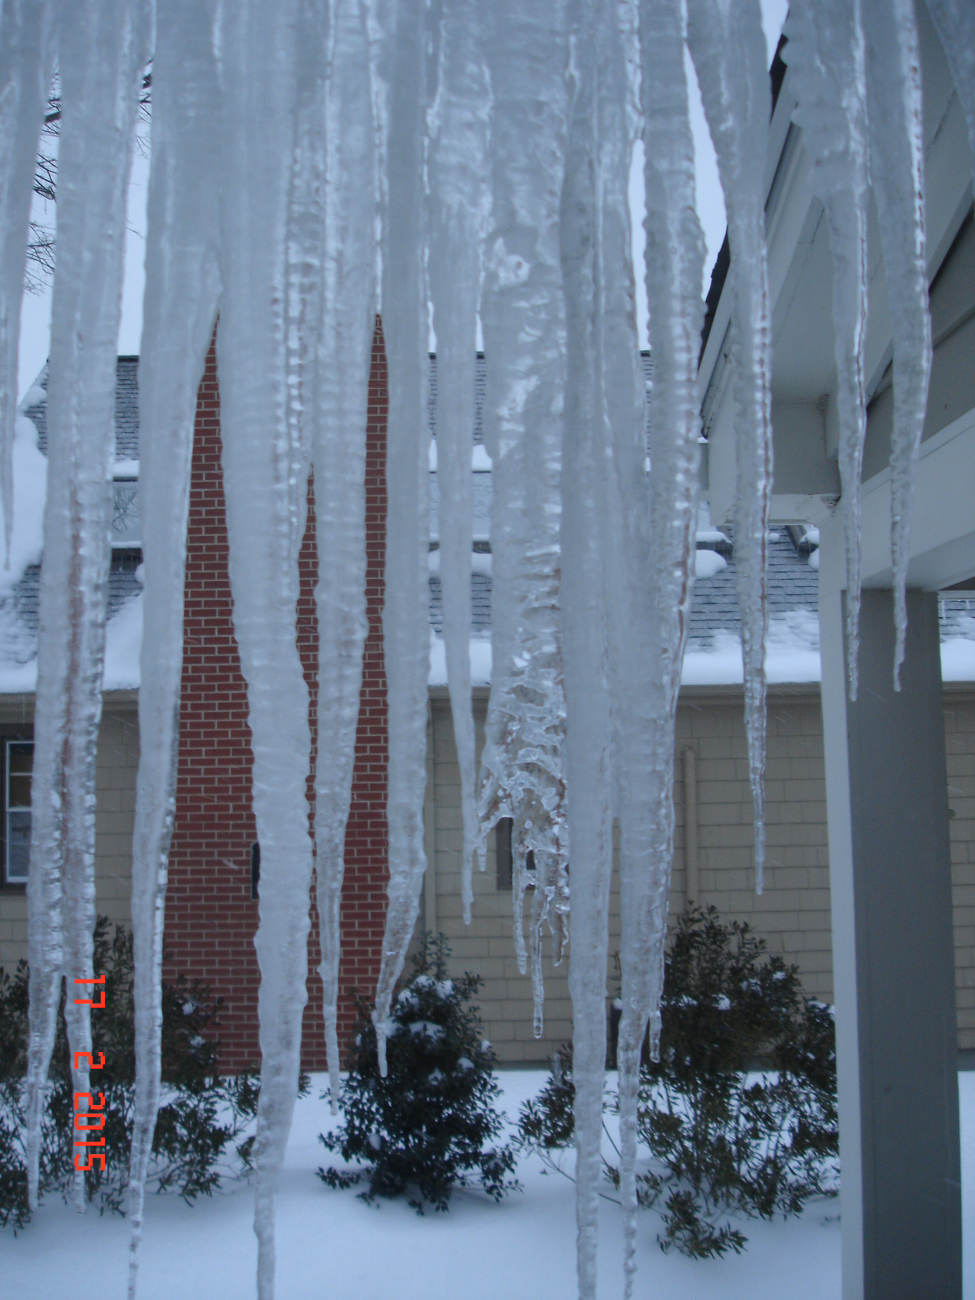 View of neighbor's house through the icicles